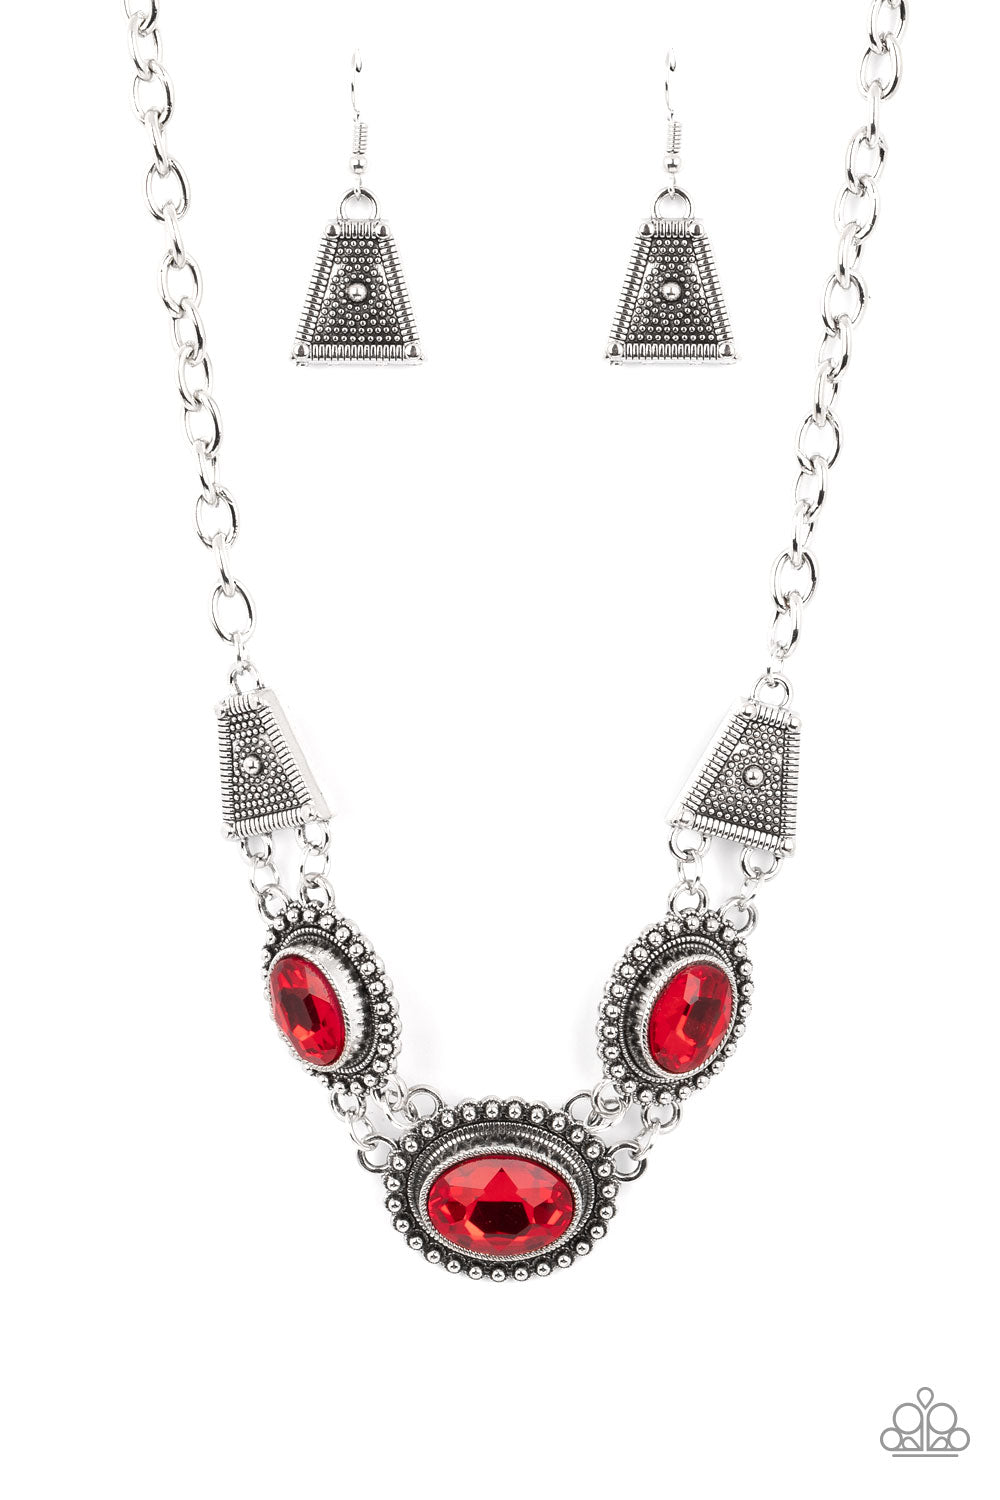 Textured TRAPEZOID Red Necklace - Paparazzi Accessories  Classic oval-shaped rhinestones in a vibrant red hue sit prominently atop silver frames bordered in studded texture. Trapezoidal shaped frames filled with dizzying silver texture lay on each side of the colorful gems, as they fall along the collar in a breathtaking finish. Features an adjustable clasp closure.  Sold as one individual necklace. Includes one pair of matching earrings.